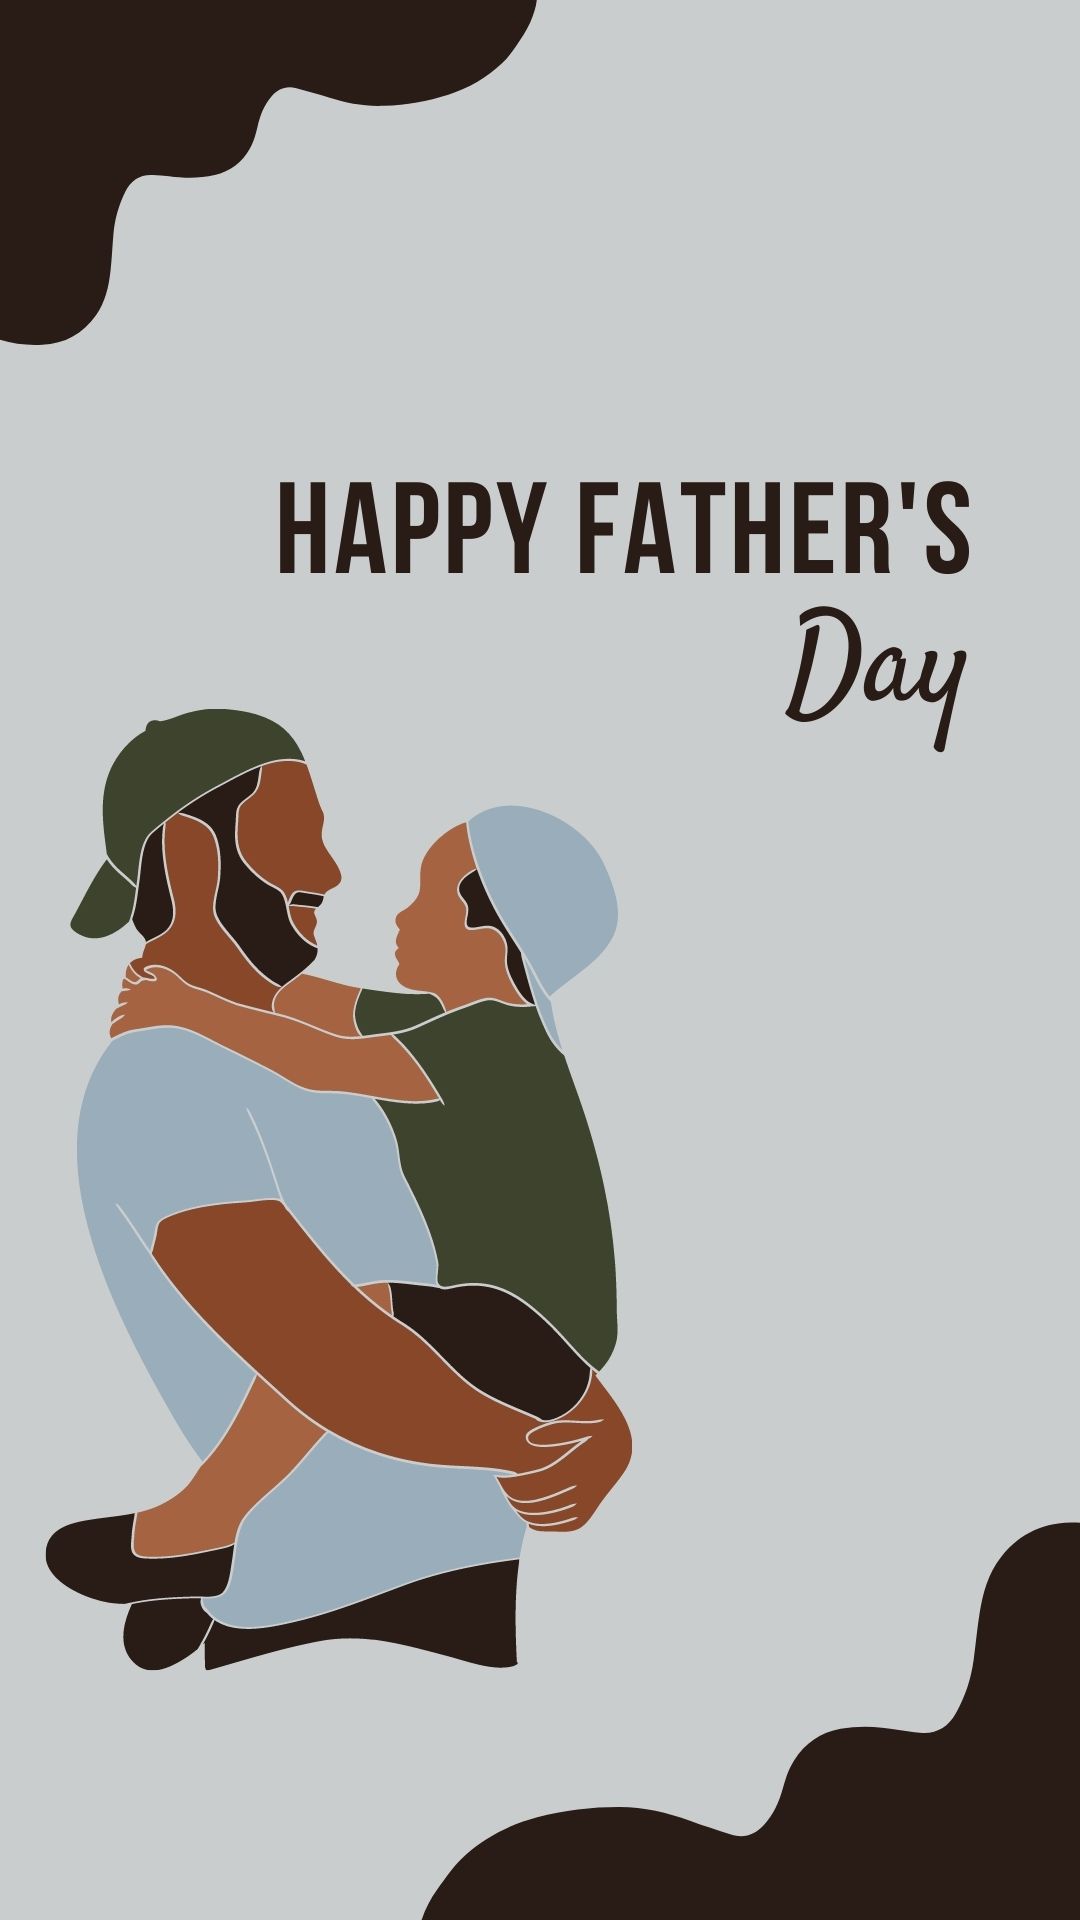 best happy father's day wishes images for instagram story (24)